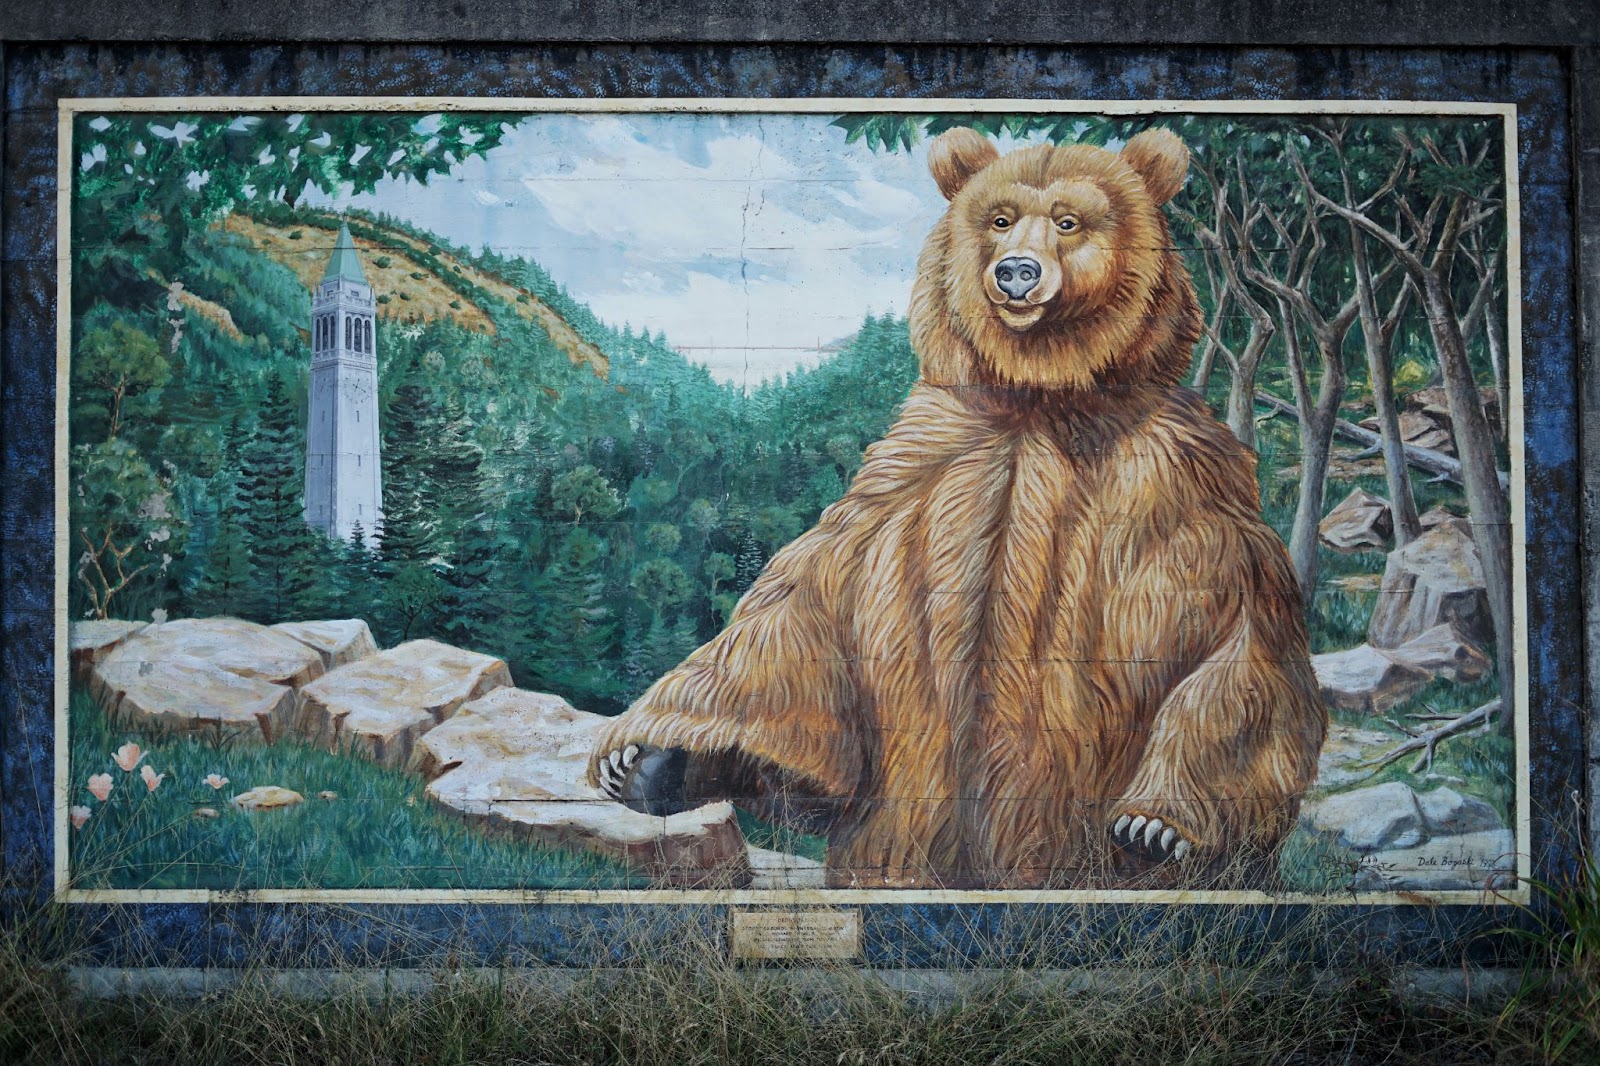 A mural of a bear standing in woods, witht eh Sather Tower in the background.